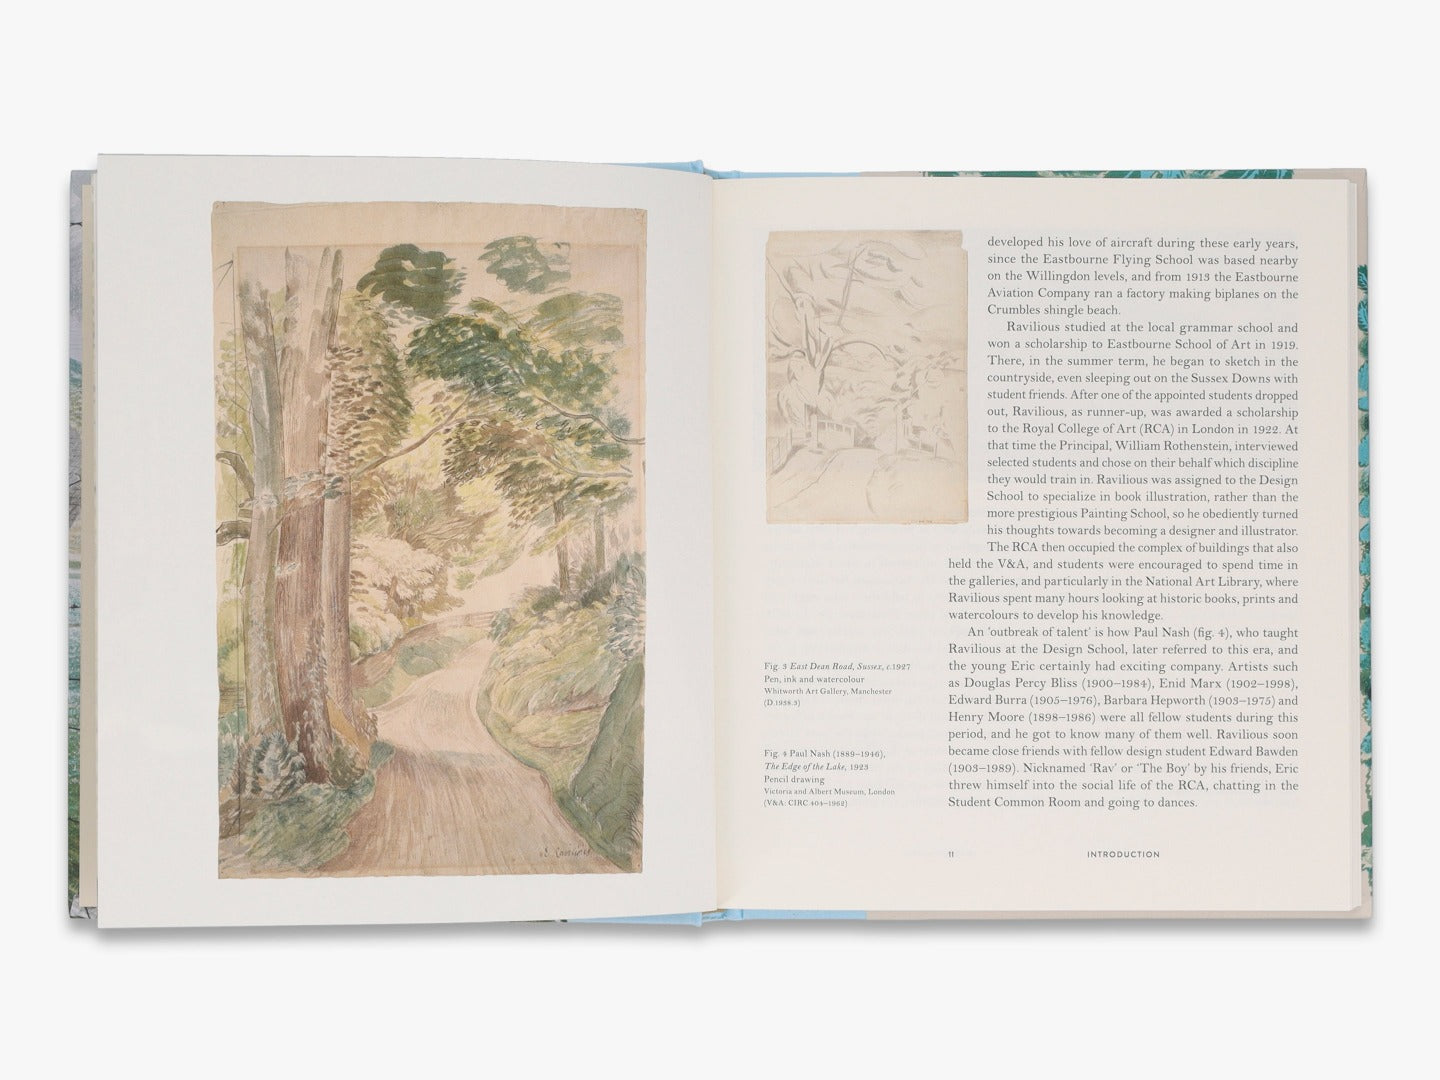 Page of book 'Eric Ravilious: Landscapes & Nature' with text and sketch of trees